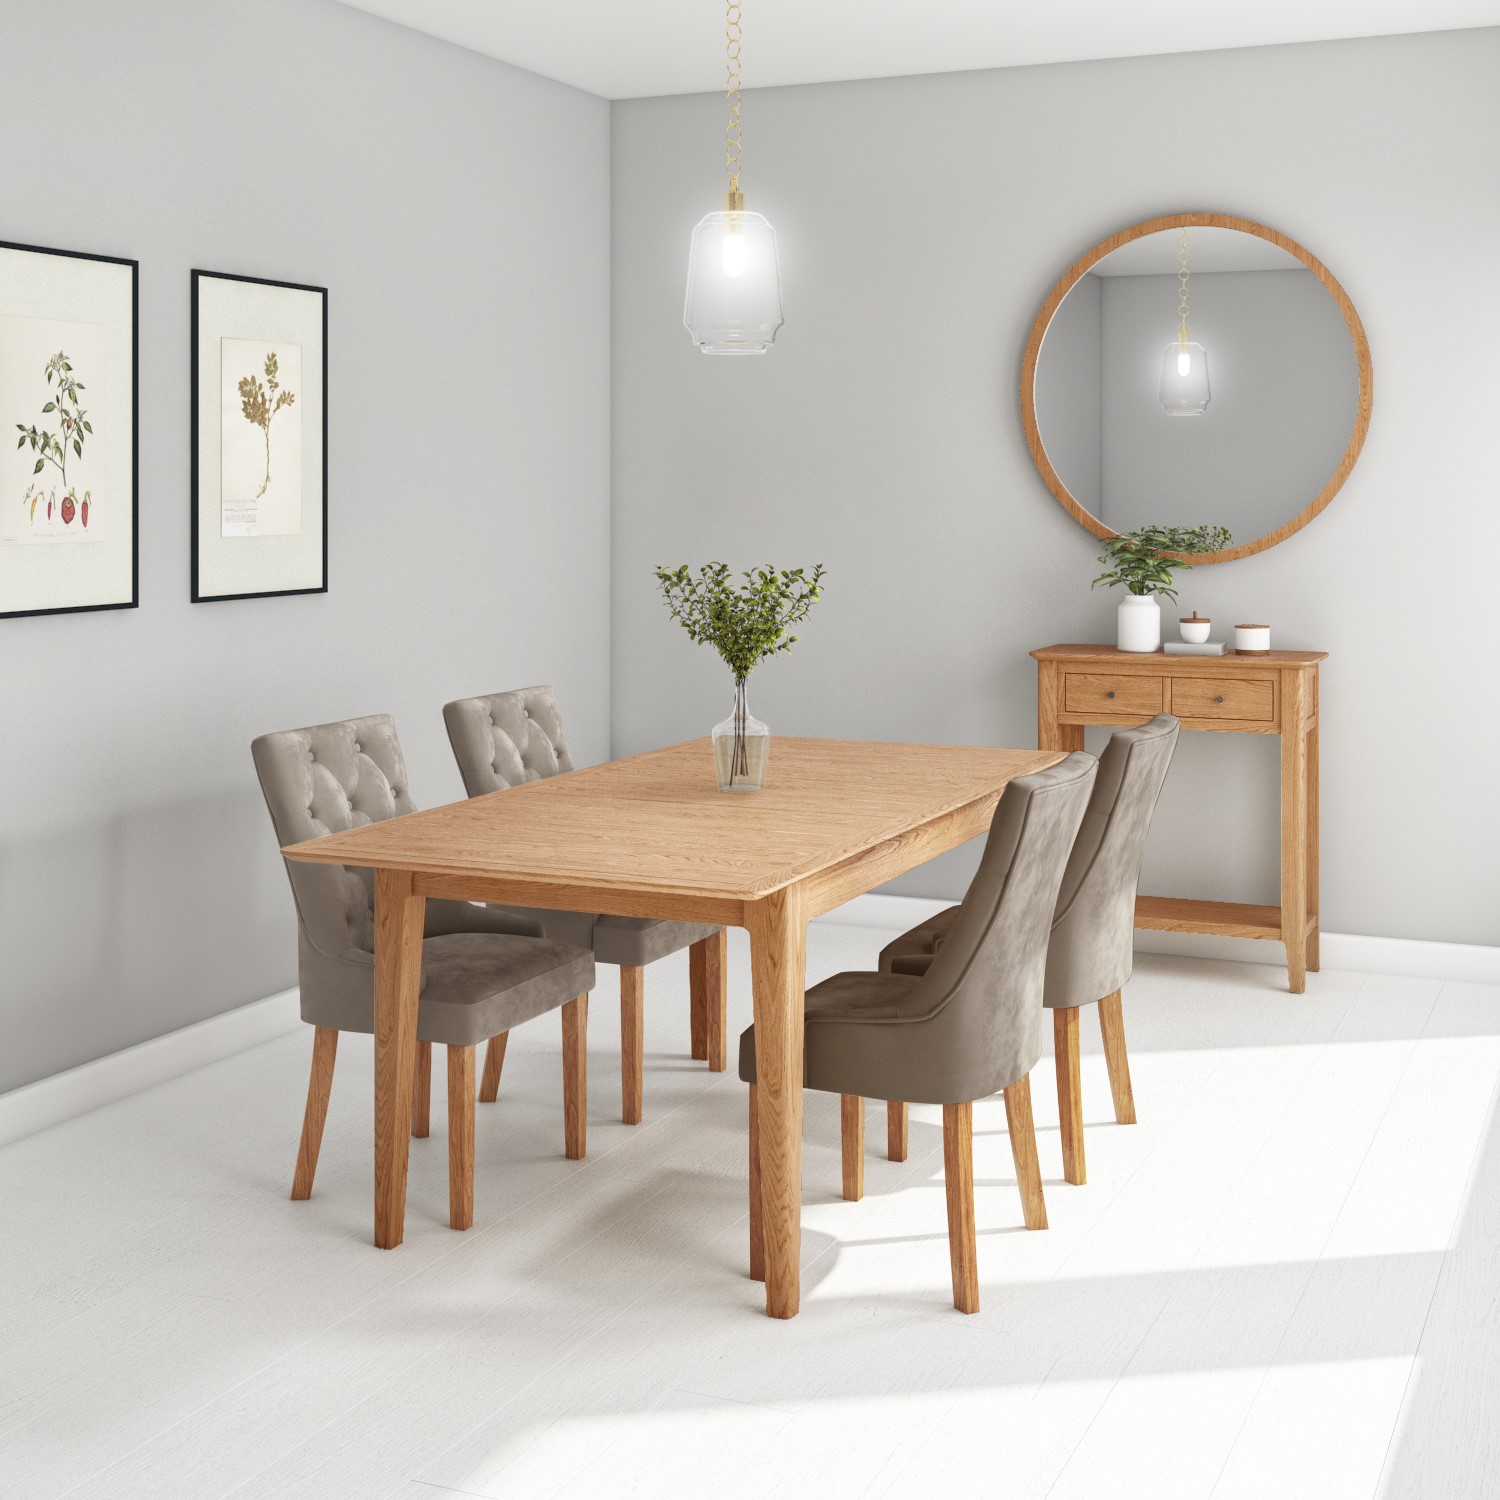 Extendable Dining Set In Solid Oak With, Extendable Dining Room Table Seats 123